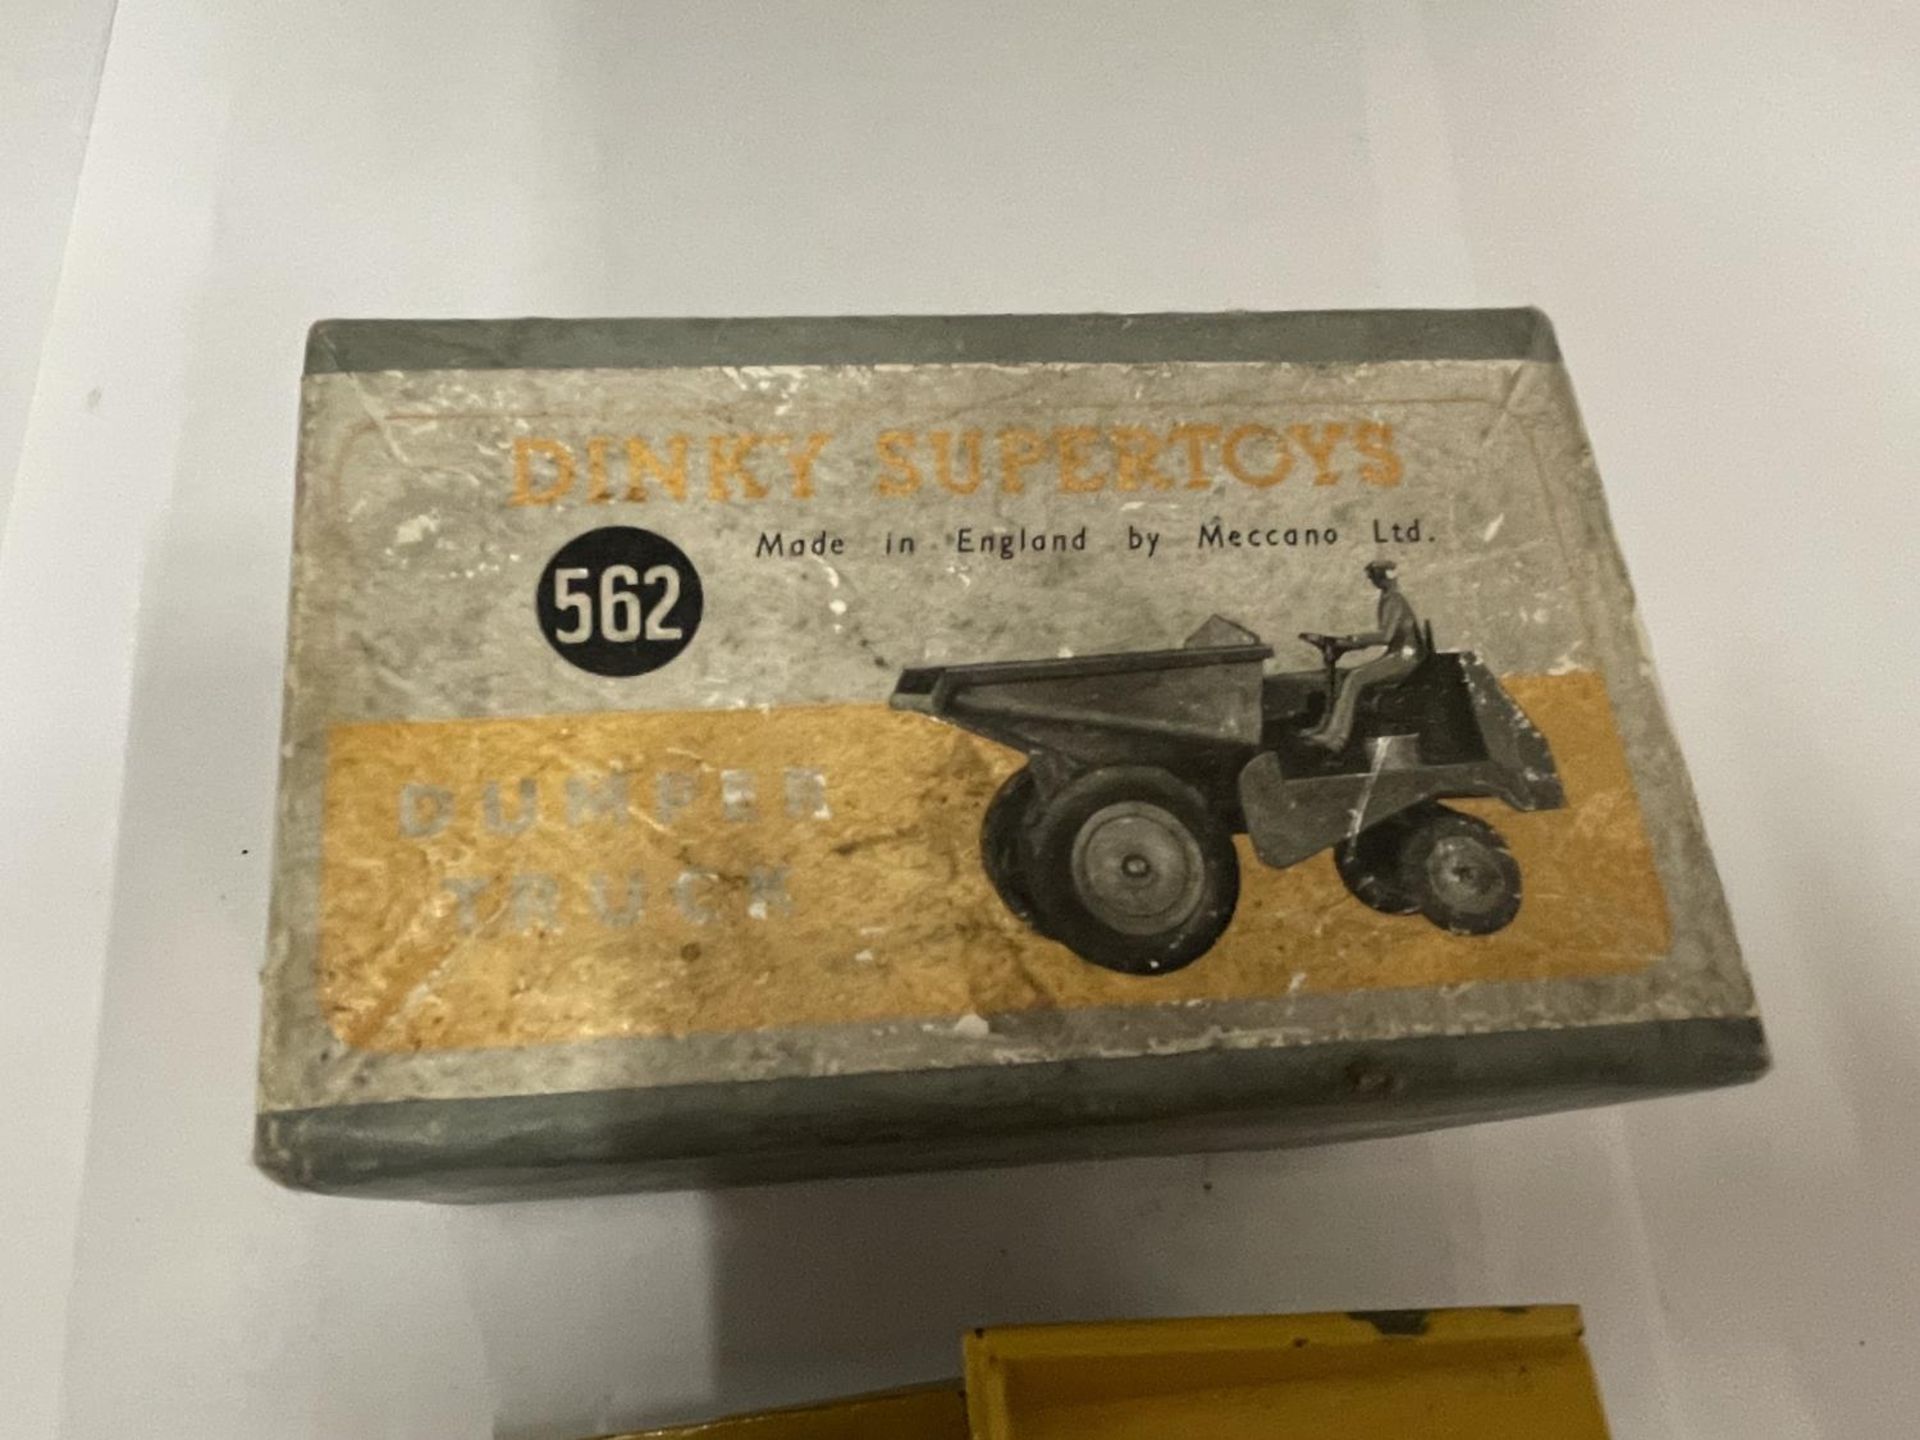 A BOXED DINKY DUMPER TRUCK - Image 3 of 3